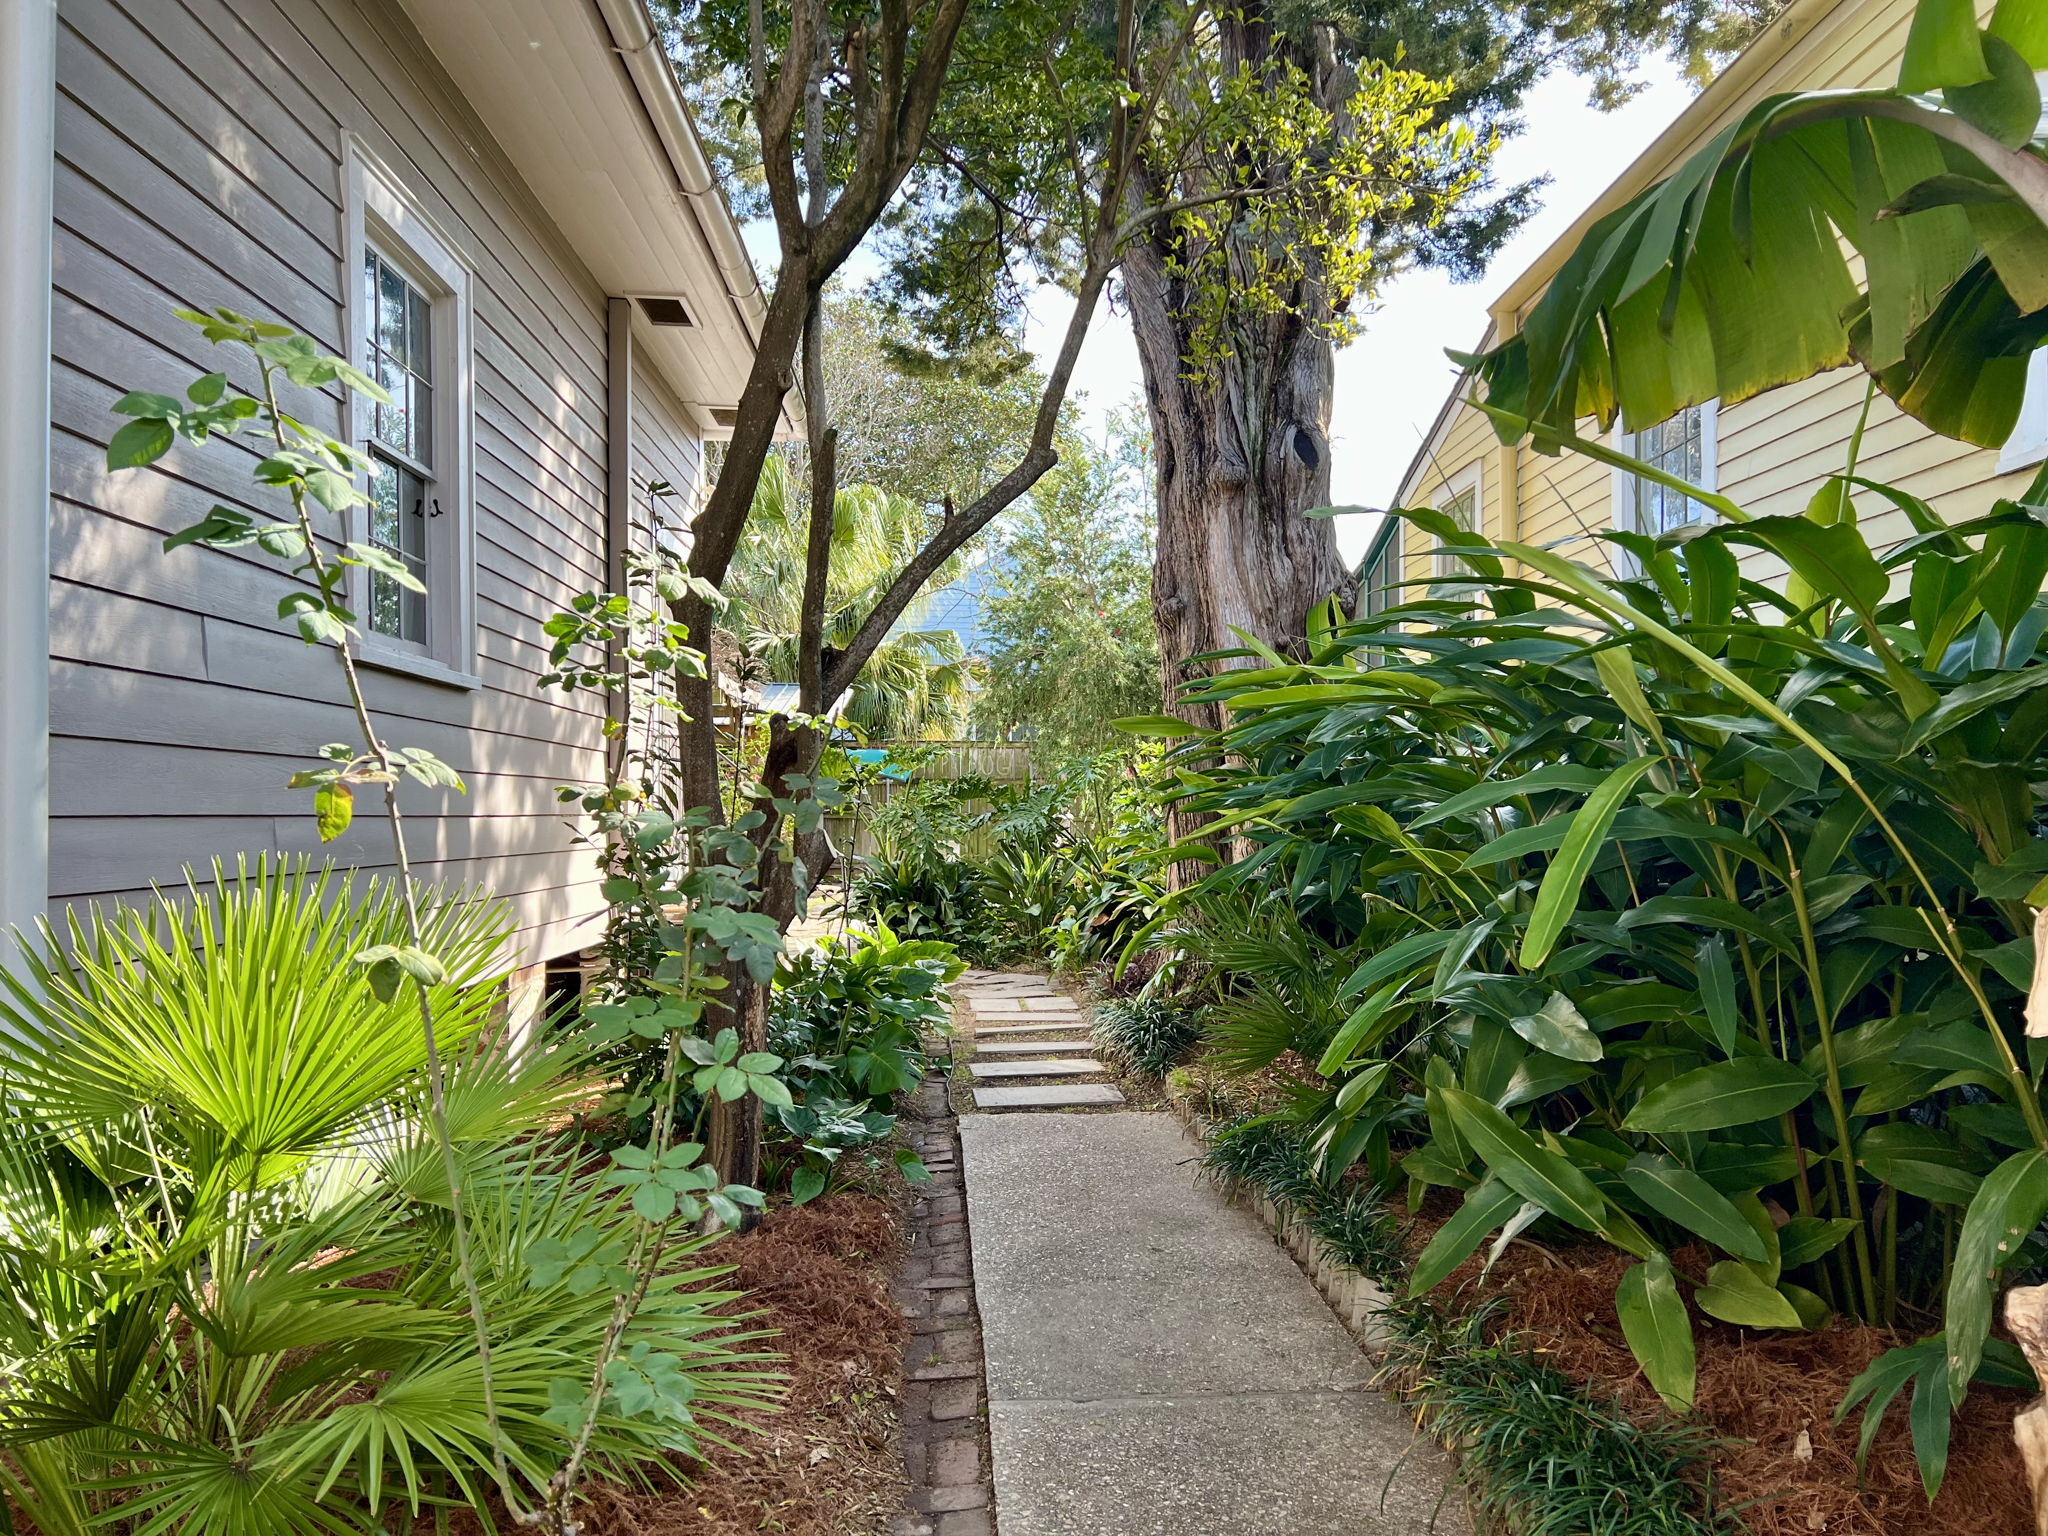 Mature landscaping includes a producing pecan trees in the sideyard and citrus and fig trees in the rear yard.